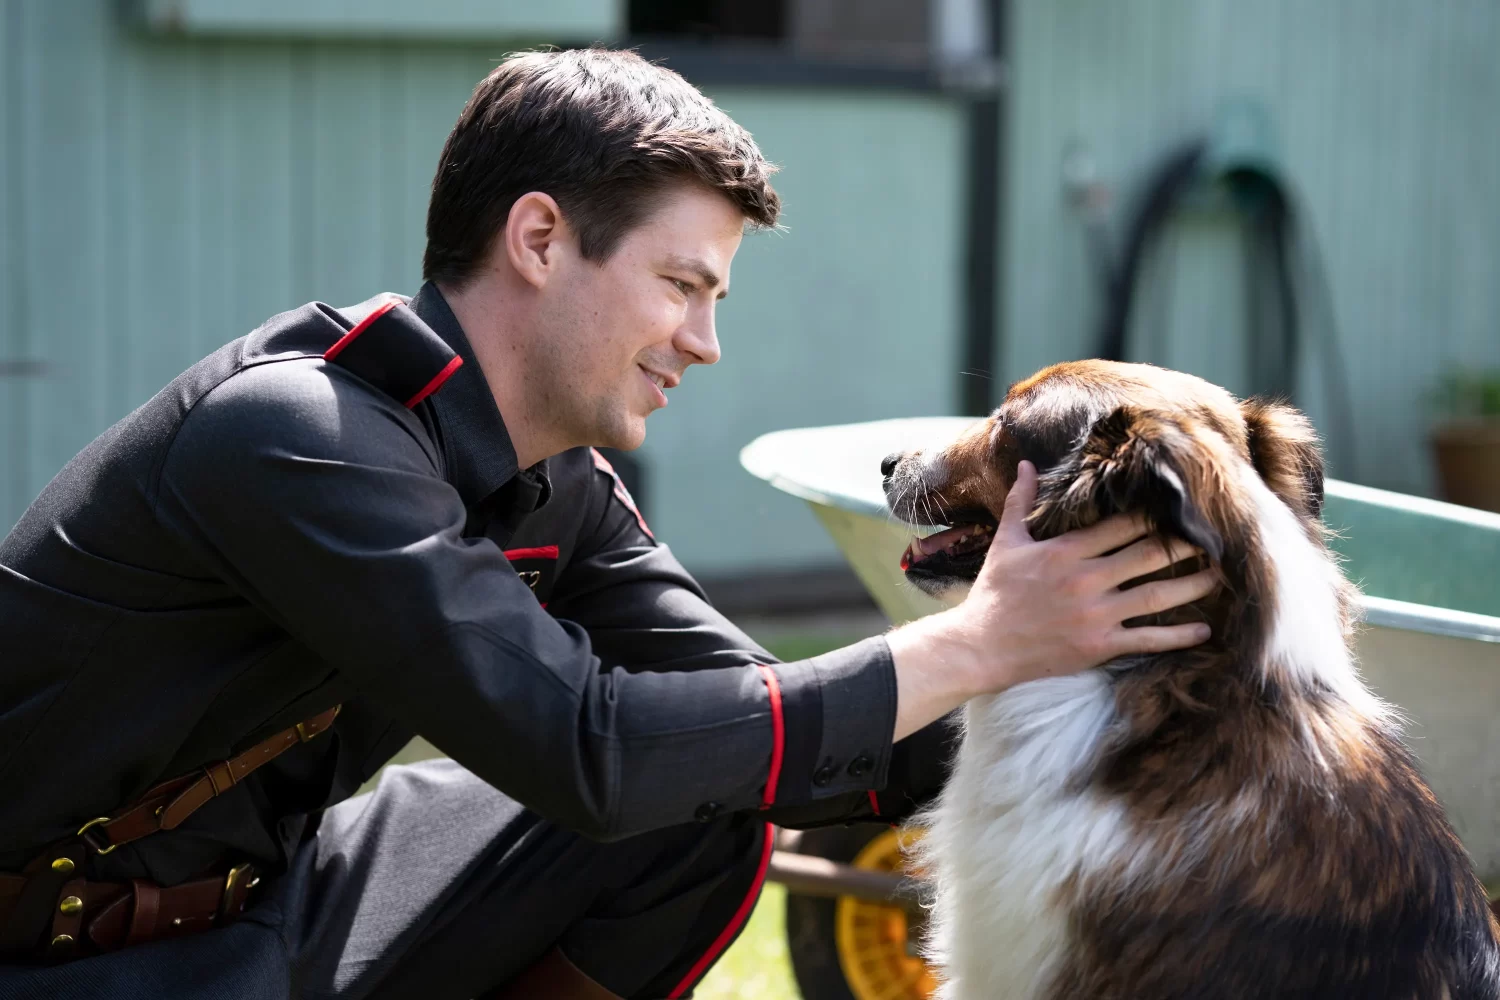 Netflixs heart-warming ‘Rescued by Ruby’ depicts the real-life story of an anxious K-9 search dog named Ruby. Rating: A+ Photo Credit: Fezziwig Studios